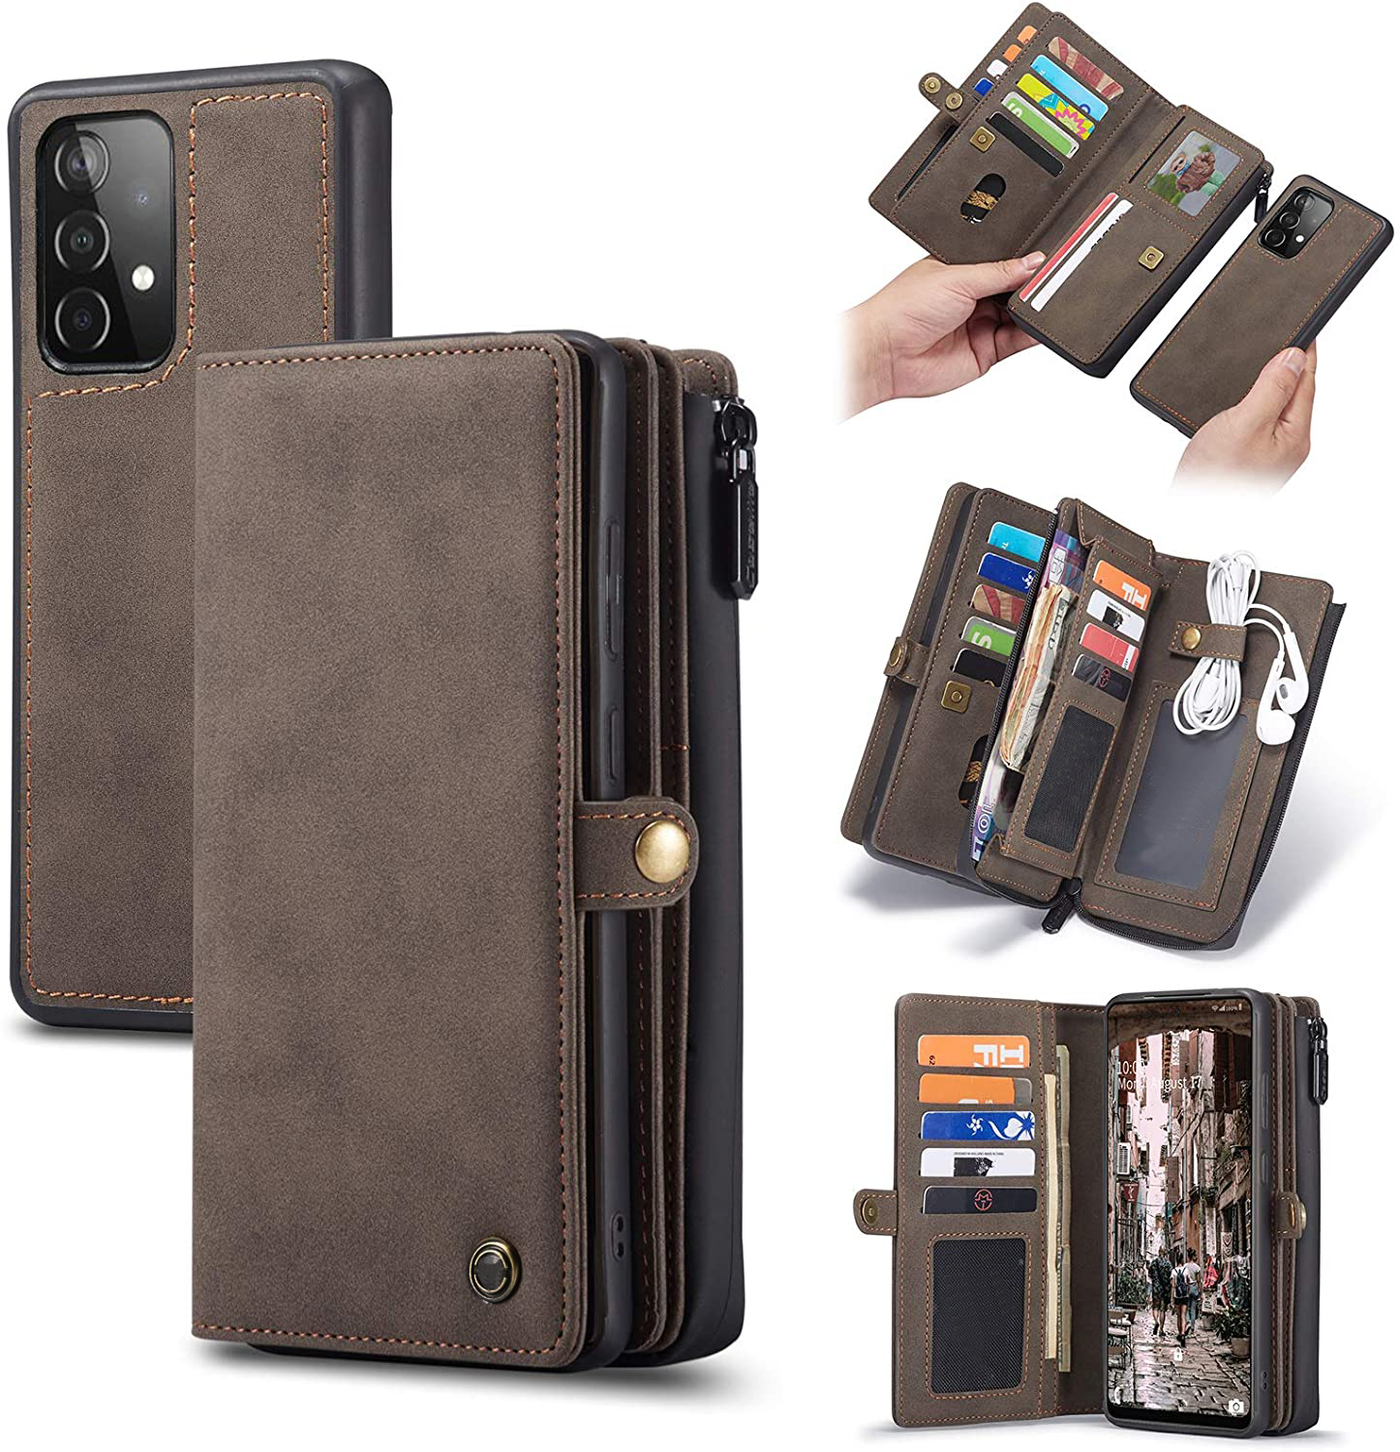 Samsung Galaxy A72 coffee color leather wallet flip cover case By excelsior